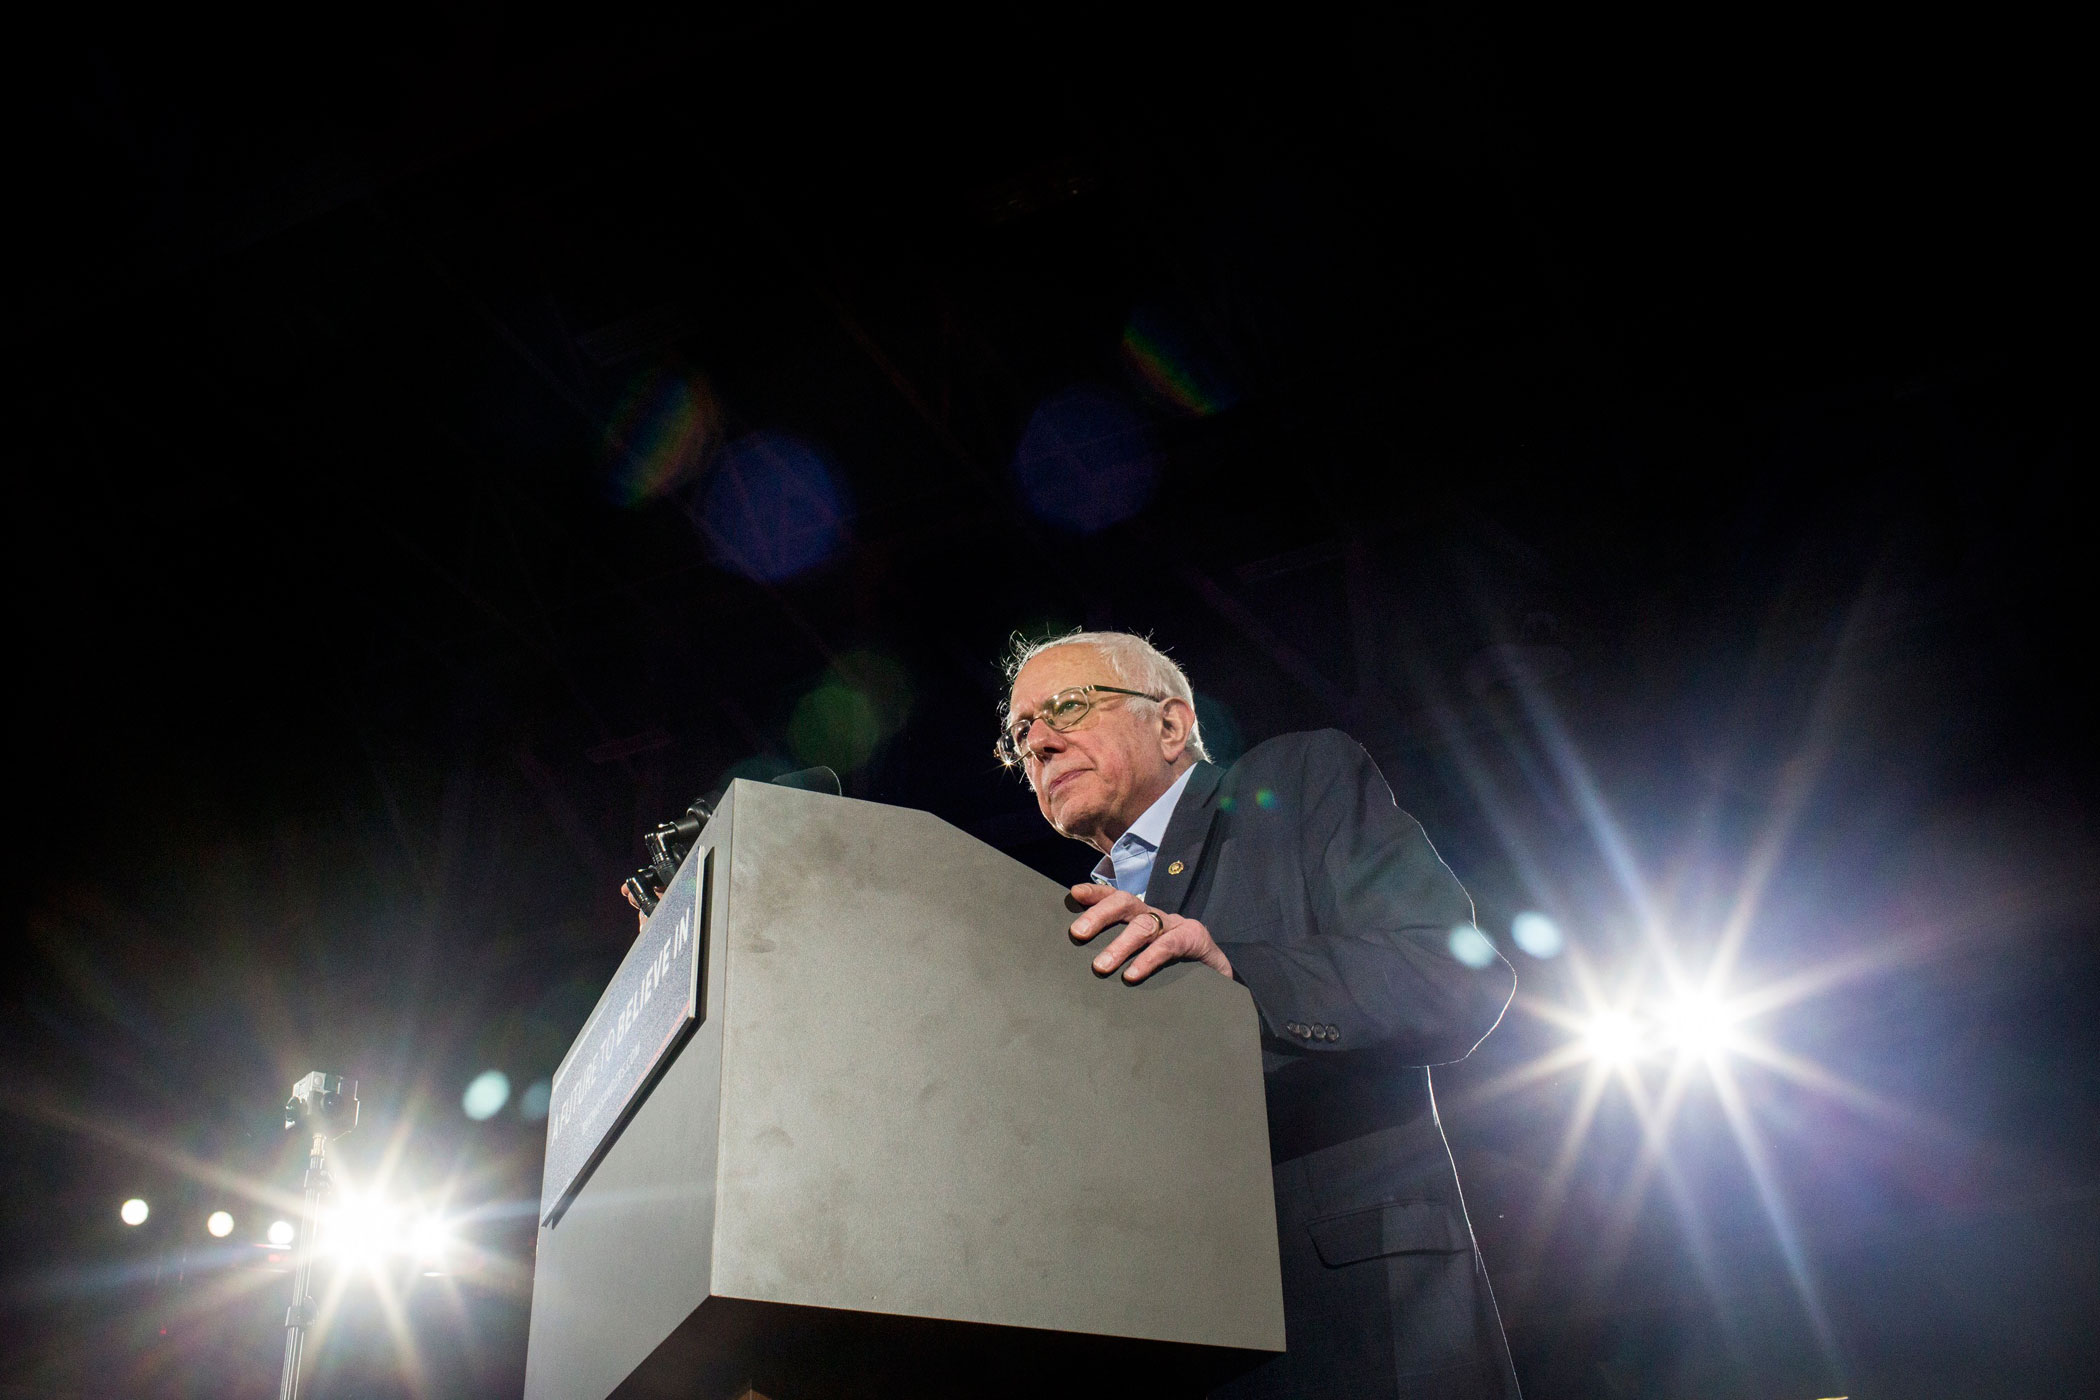 Bernie Sanders speaks during a campaign rally and concert in Iowa City, Iowa on Jan. 30, 2016.